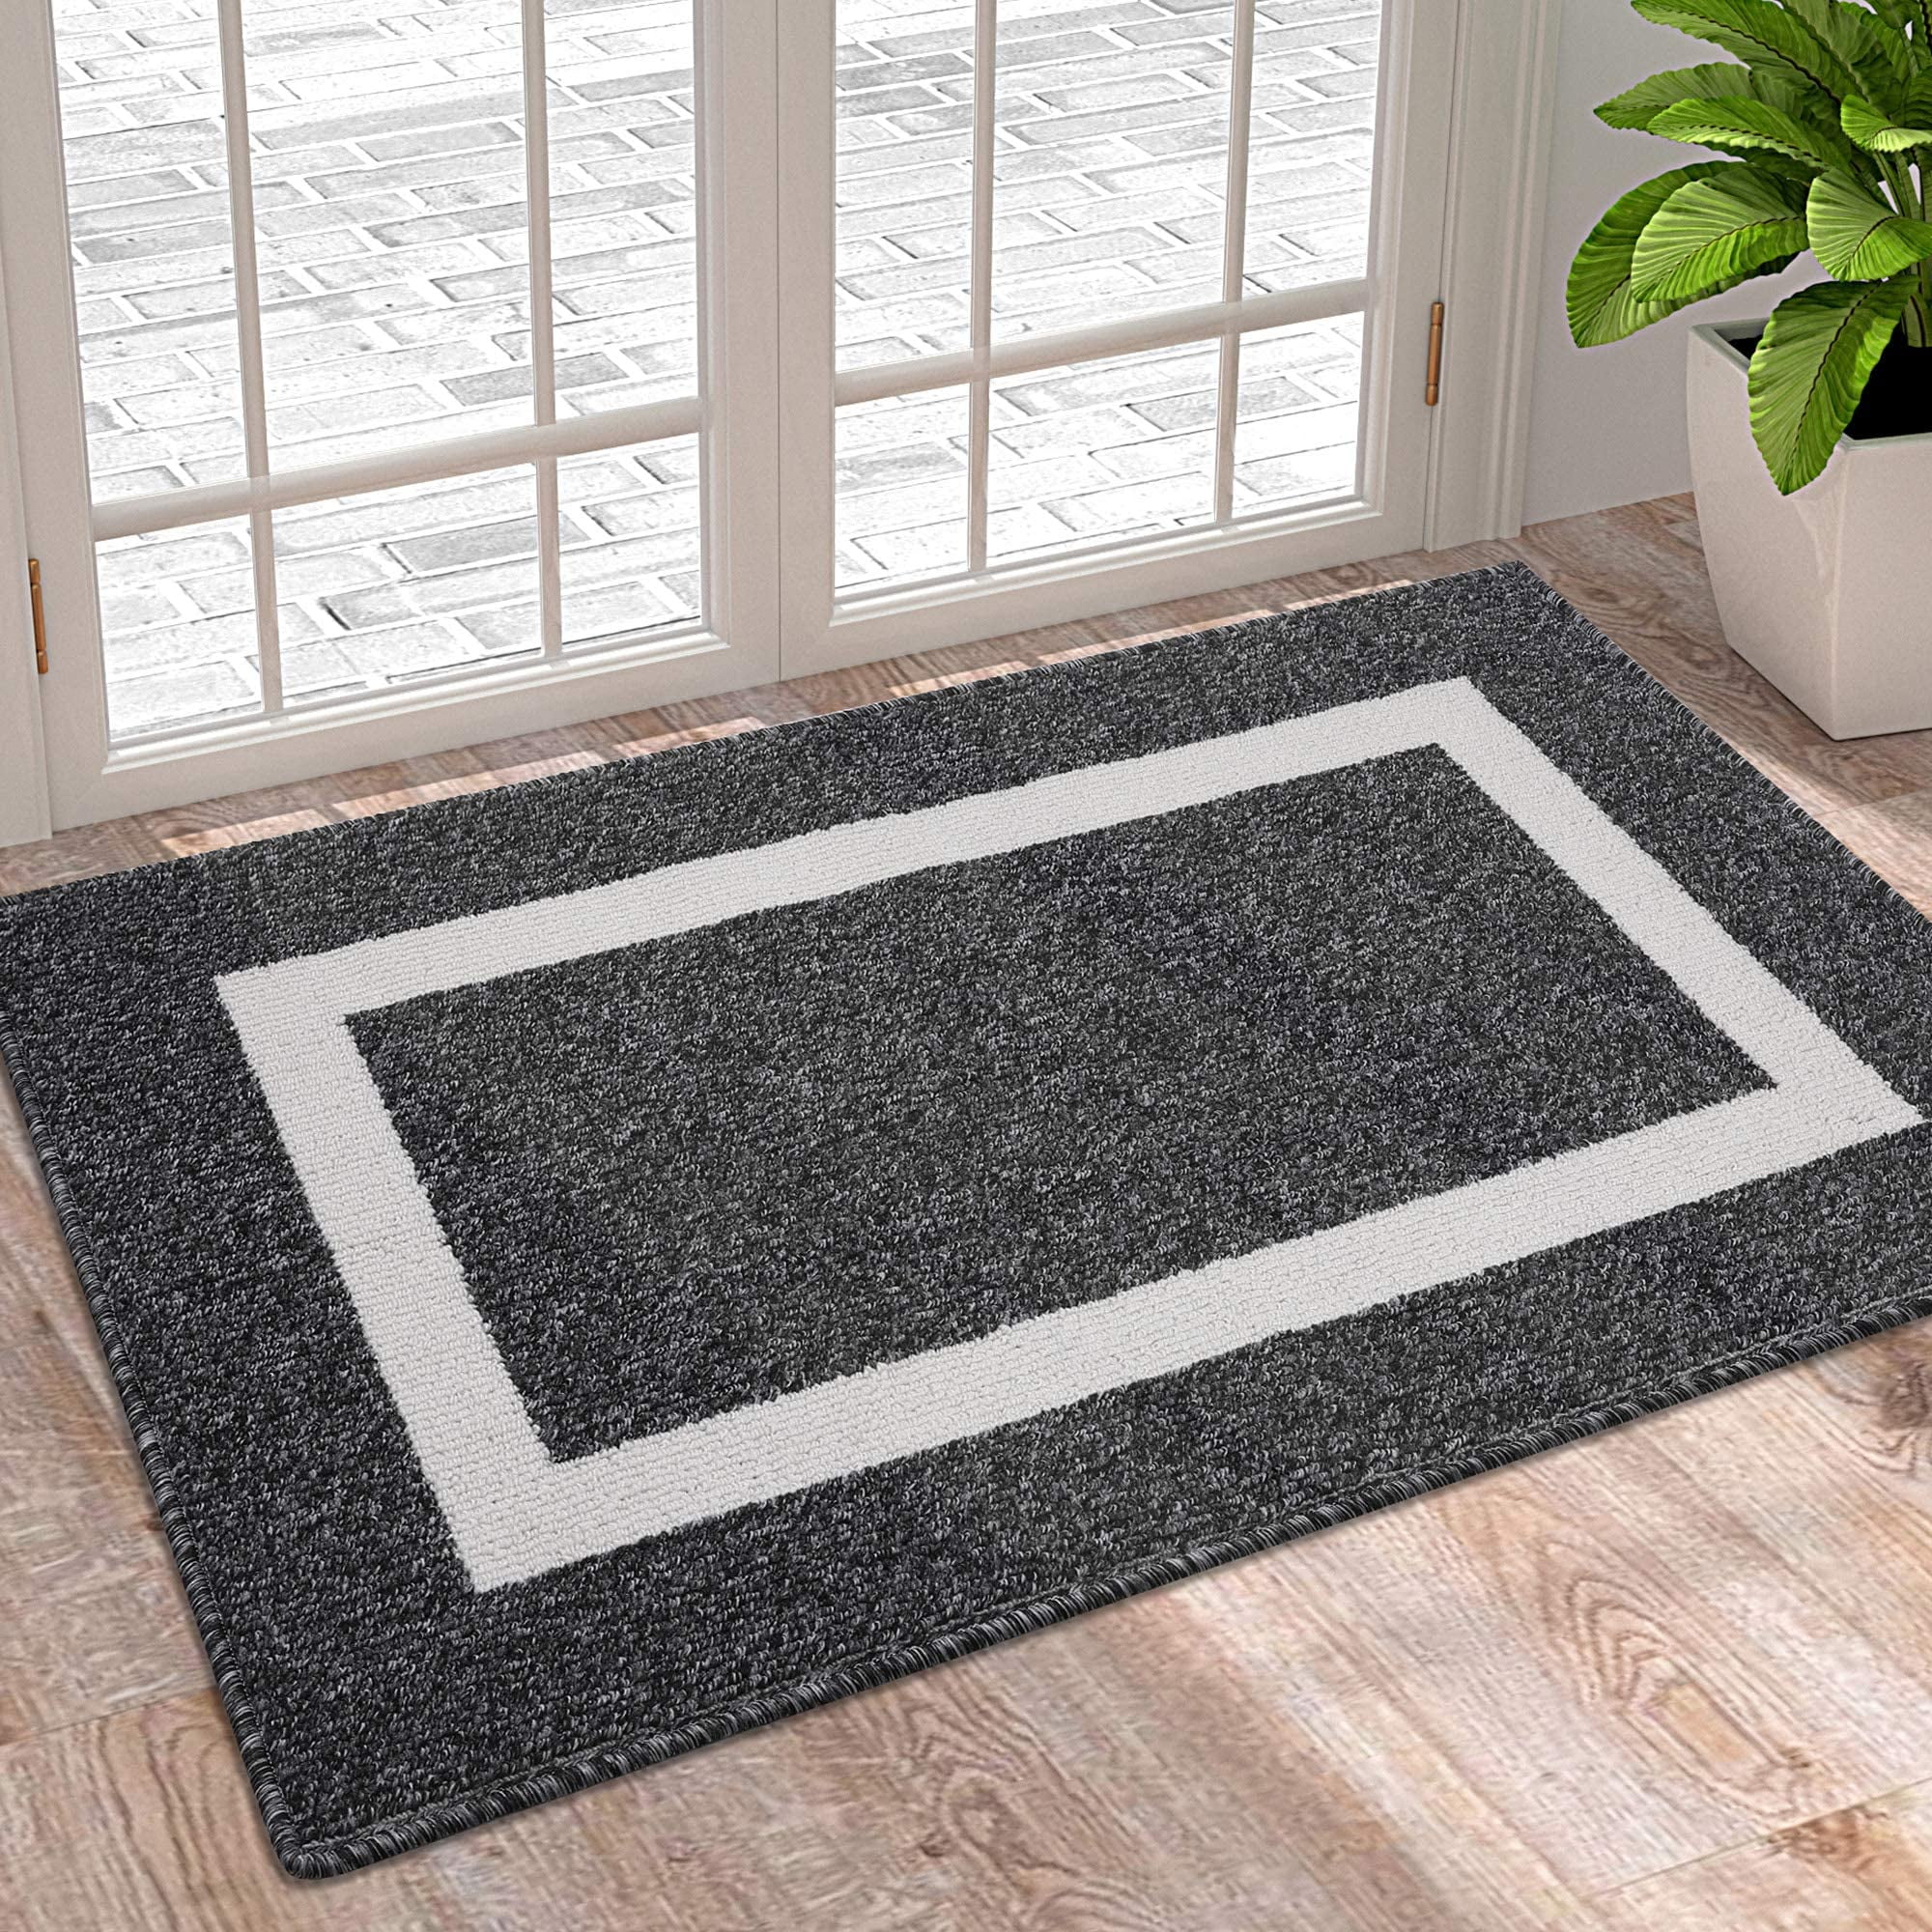 Low-Profile Rug Mats for Entry Standing in The Lake Print Carpet 70 X 24 Outdoor Carpet Waterproof Kitchen Carpet Busy Areas Easy Clean Indoor Outdoor Carpet Carpet for Hallway